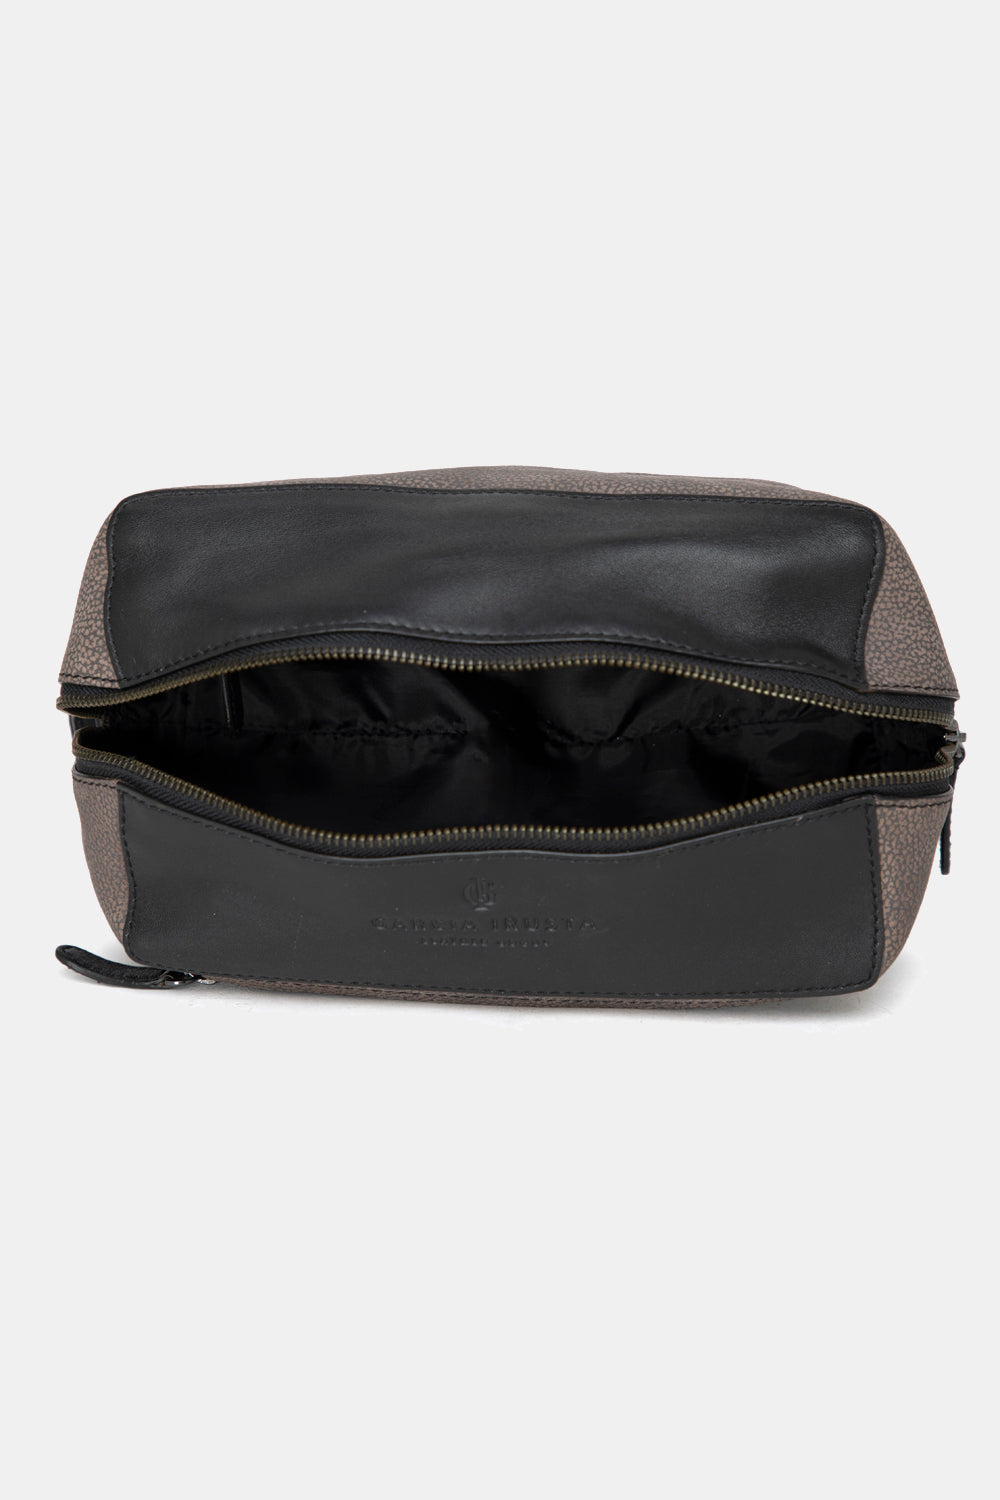 Justanned Black Textured Travel Pouch